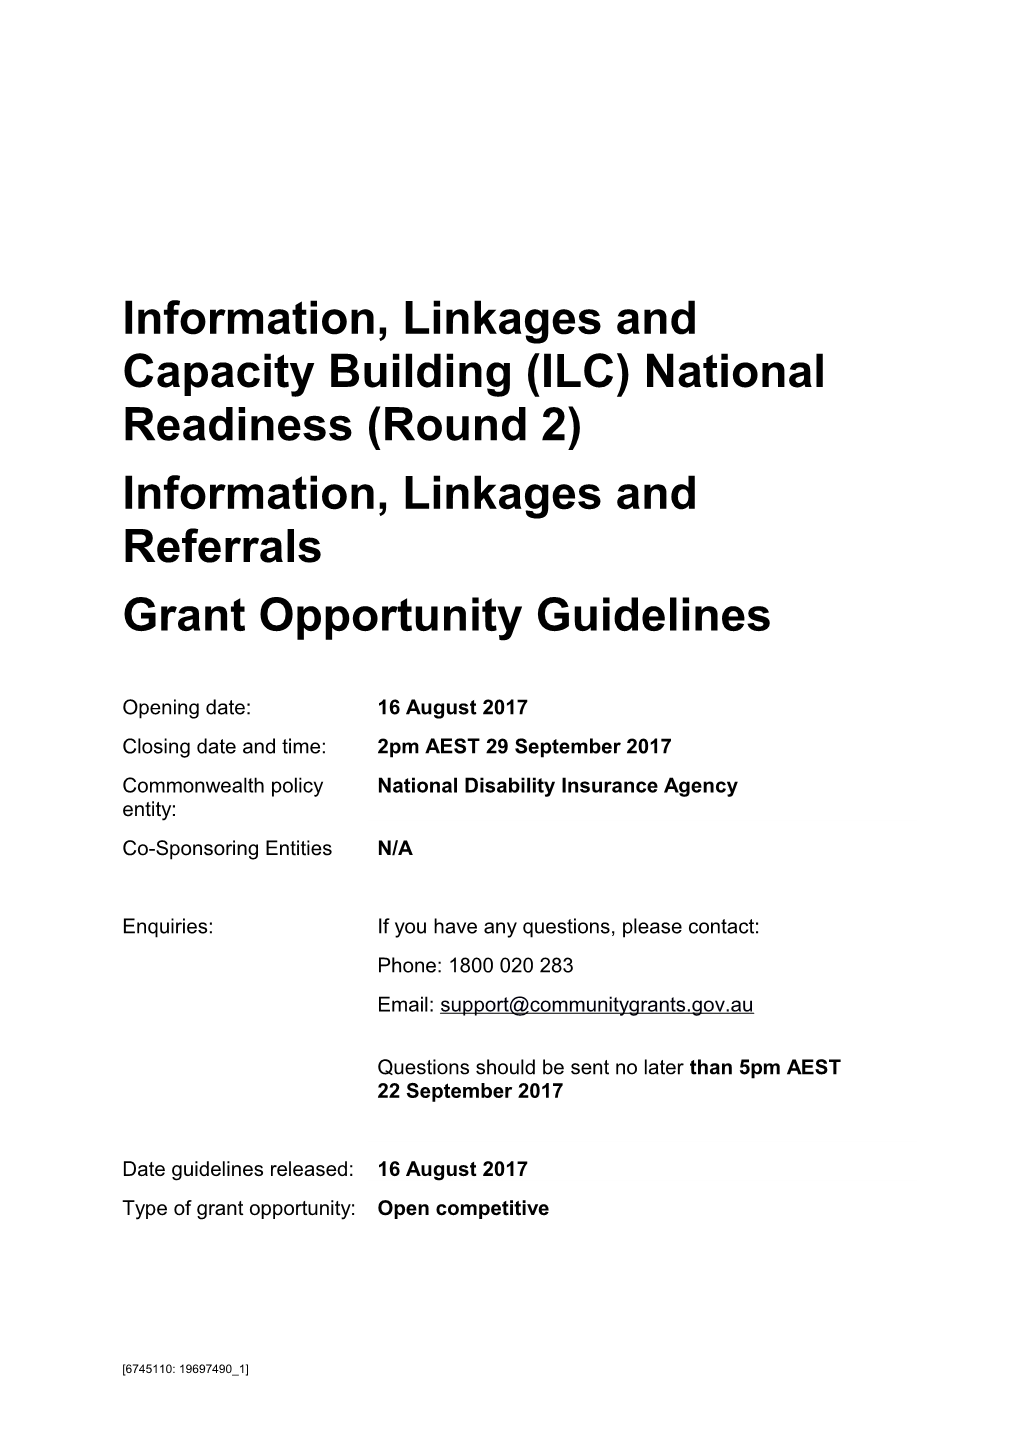 Information, Linkages and Capacity Building (ILC) National Readiness (Round 2)